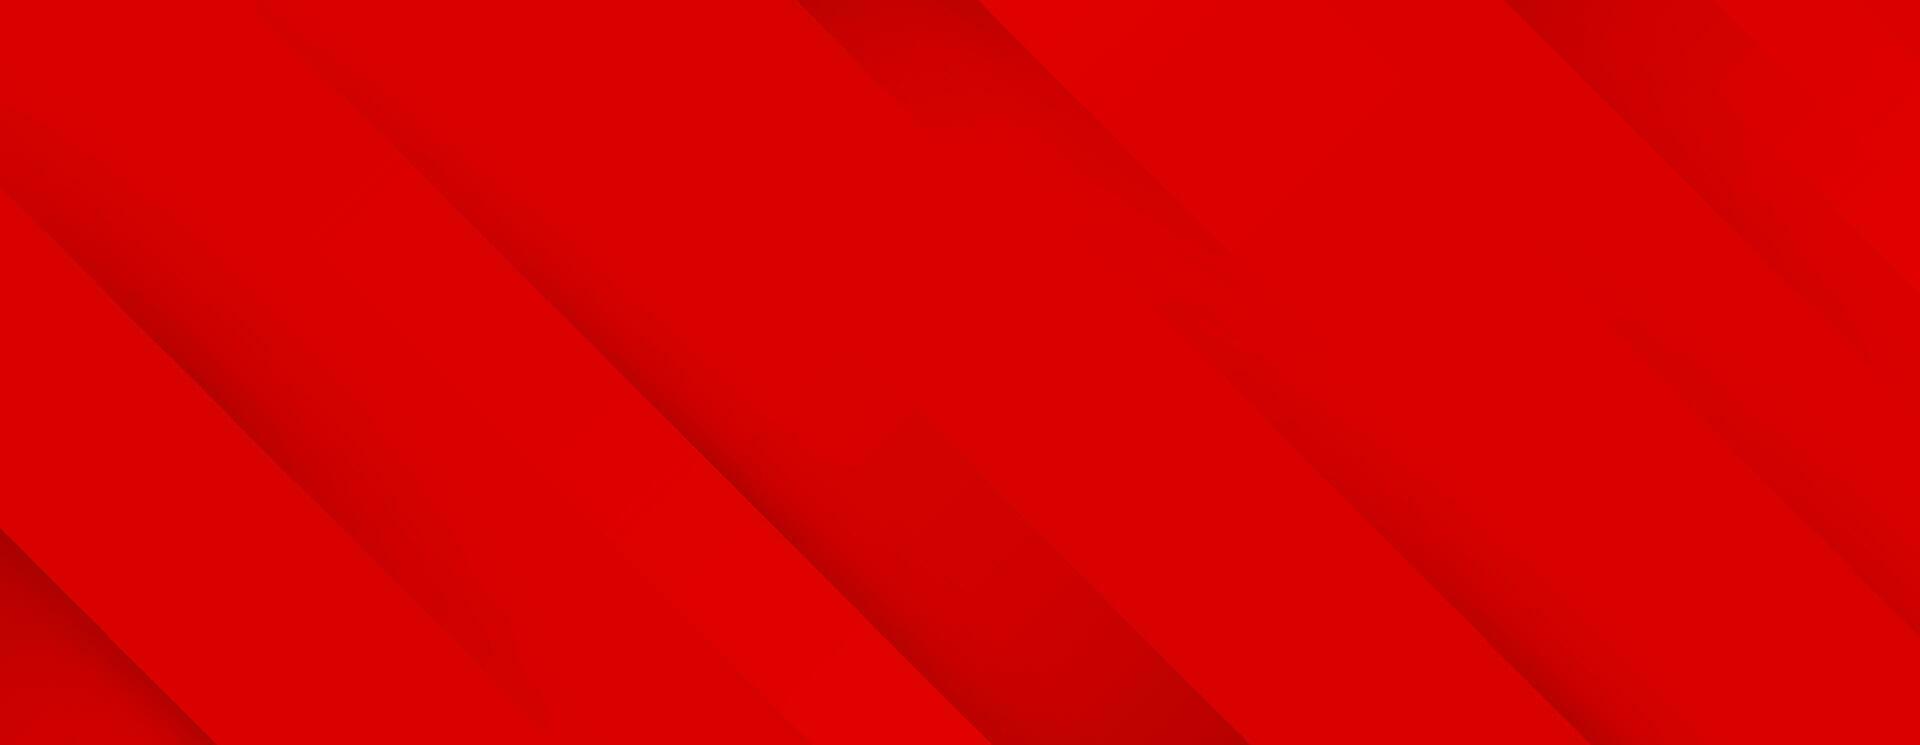 Abstract christmas background with paper layer on red background. Illustration horizontal template background banner. vector